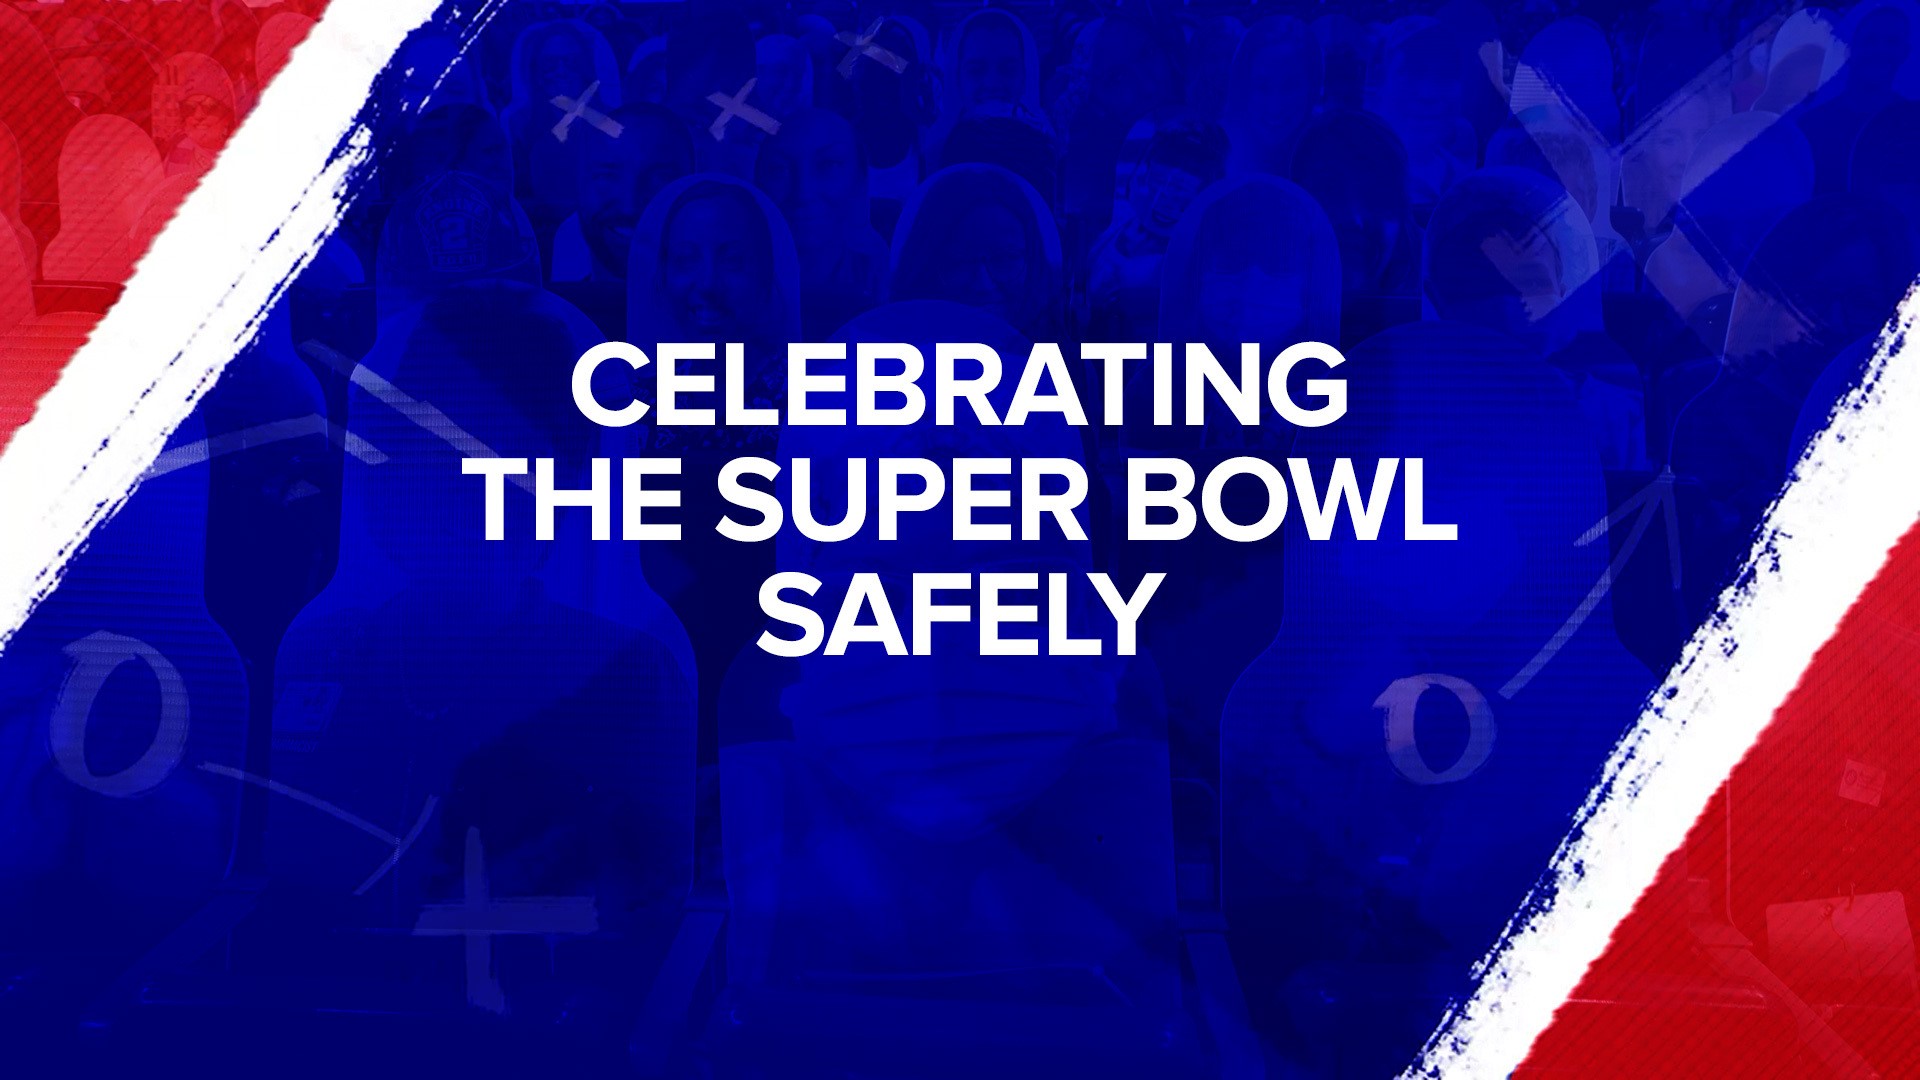 Dr. Ghaly also warned the Super Bowl could be a super spreader. Following Thanksgiving gatherings, California saw a huge spike in cases, pushing ICU’s to the brink.